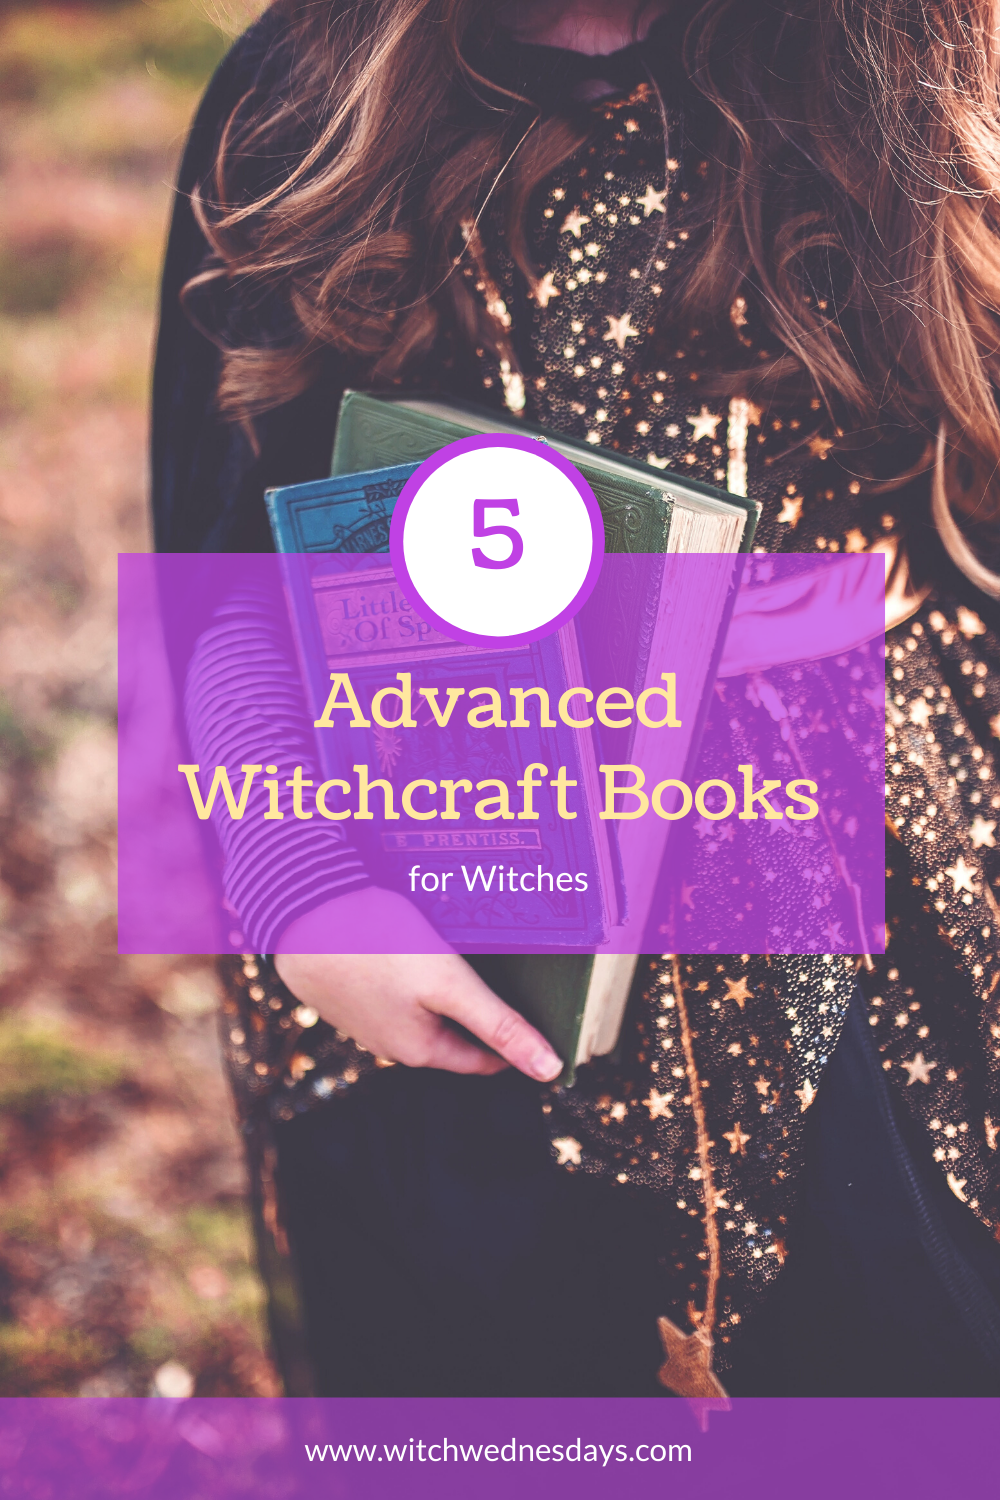 5 Witchcraft Book Recommendations for Advanced Witches